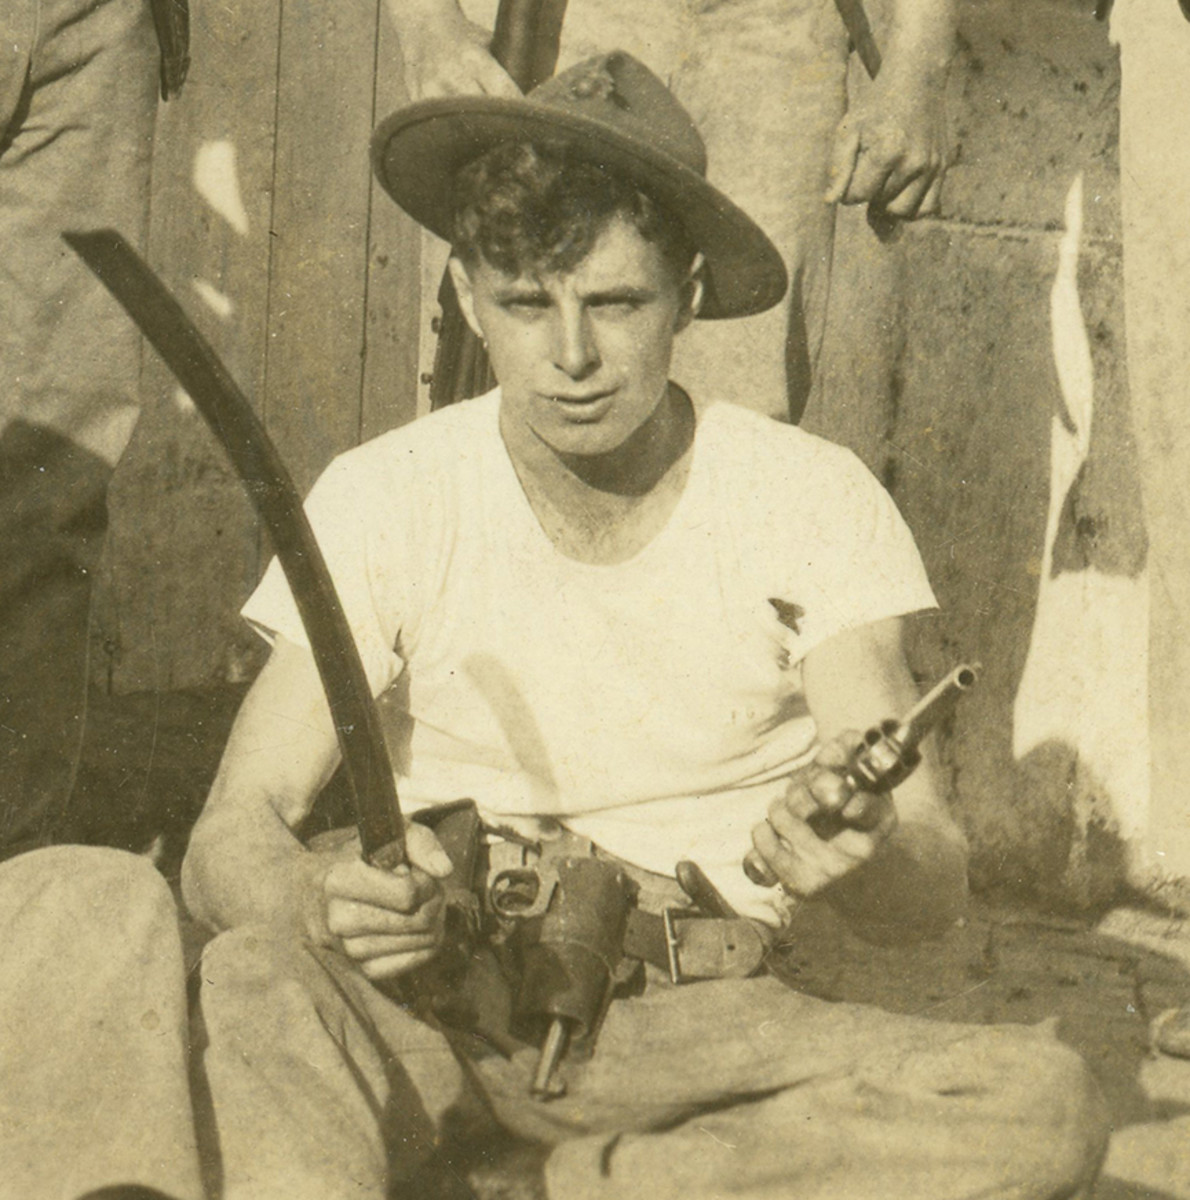 Unidentified member of the 29th Company showing off some captured arms is clearly wearing the P1912 hat as revealed by the rolled over brim.